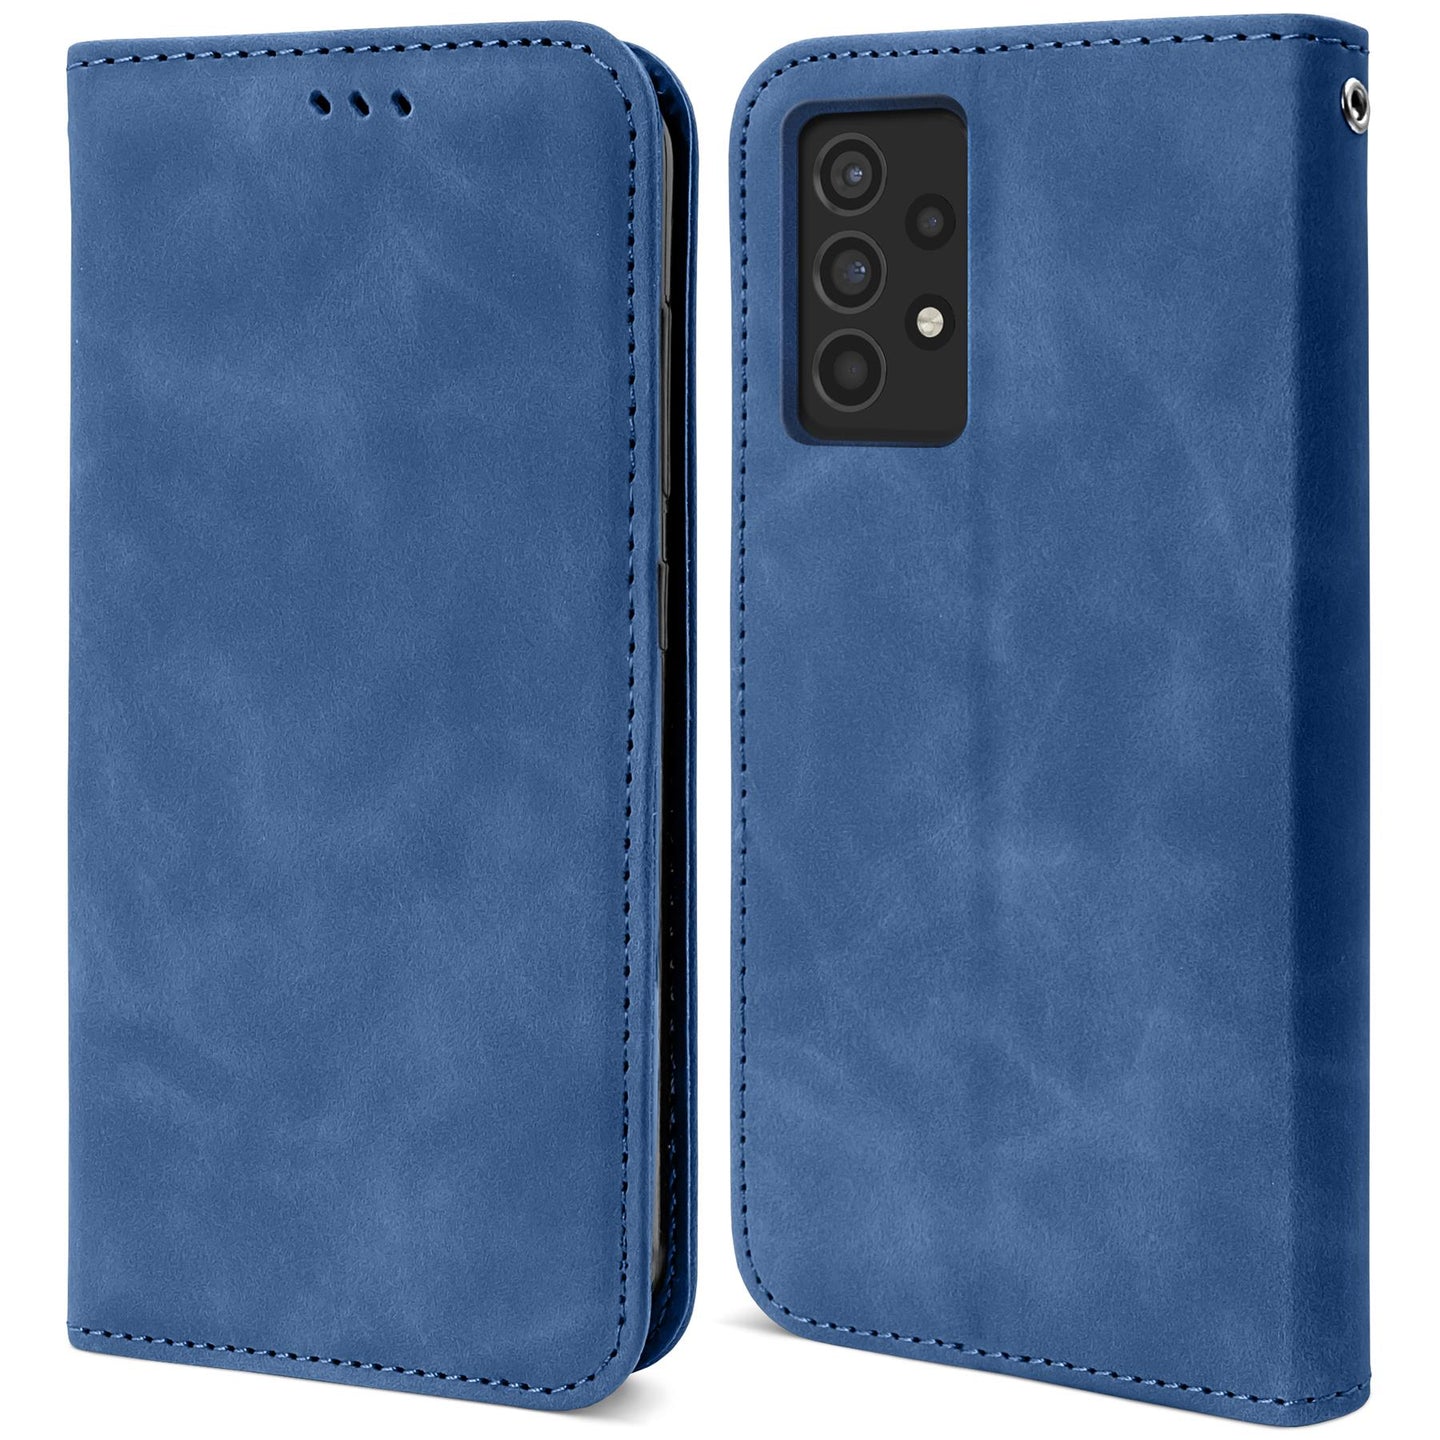 Moozy Marble Blue Flip Case for Samsung A52s 5G and Samsung A52 - Flip Cover Magnetic Flip Folio Retro Wallet Case with Card Holder and Stand, Credit Card Slots, Kickstand Function